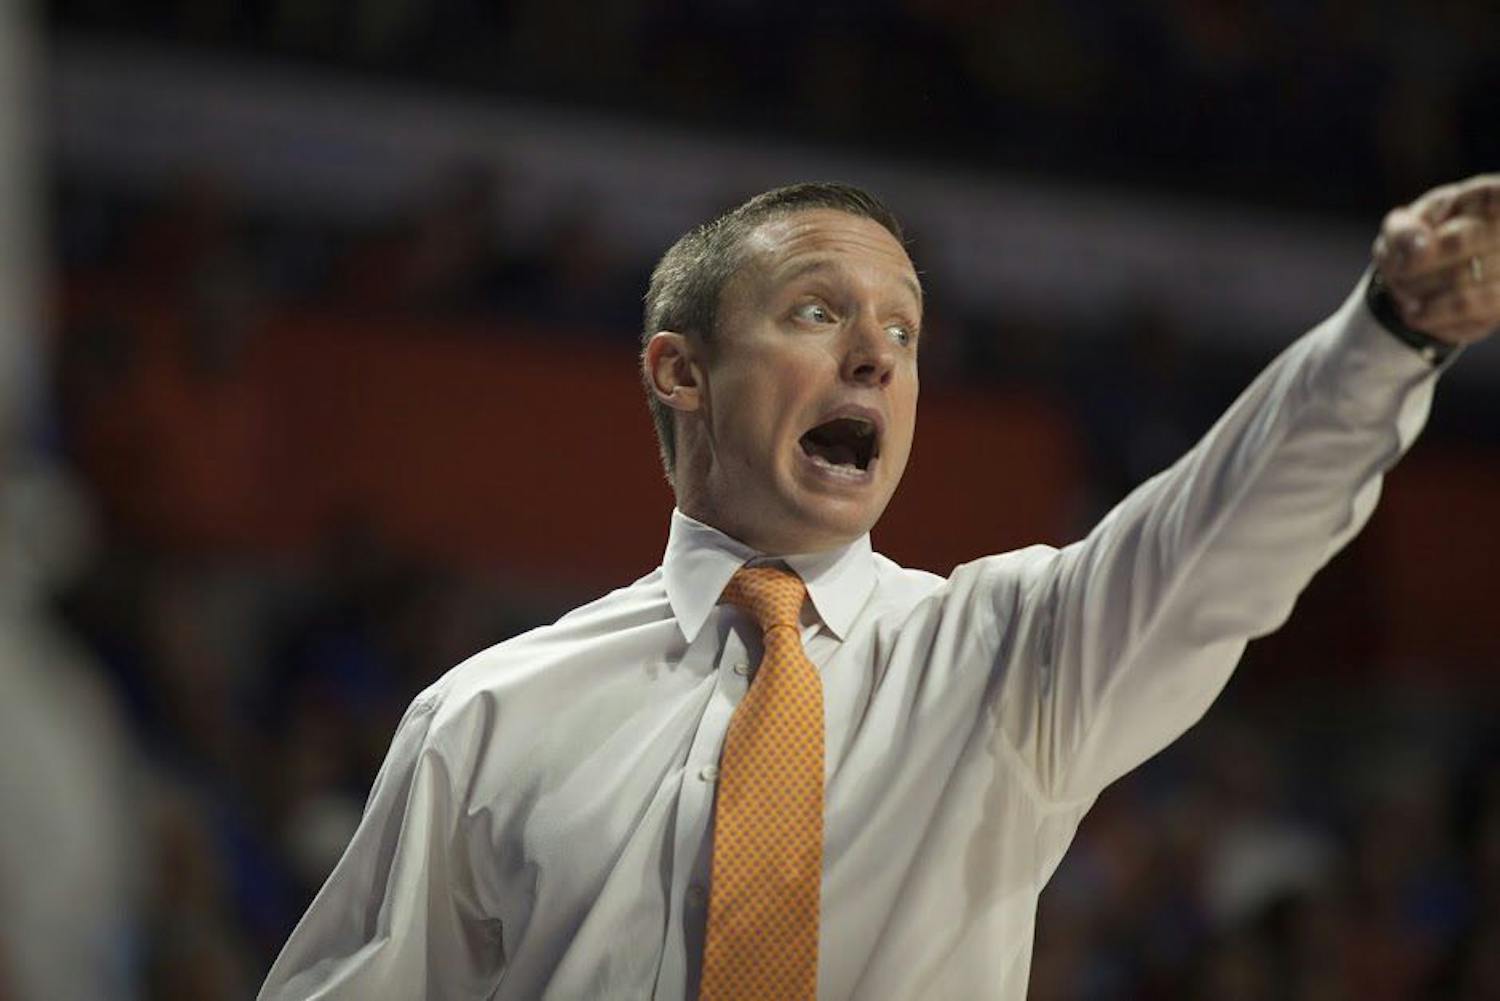 UF coach Mike White points during Florida's 81-66 win over South Carolina on Feb. 21, 2017, in the O'Connell Center.&nbsp;